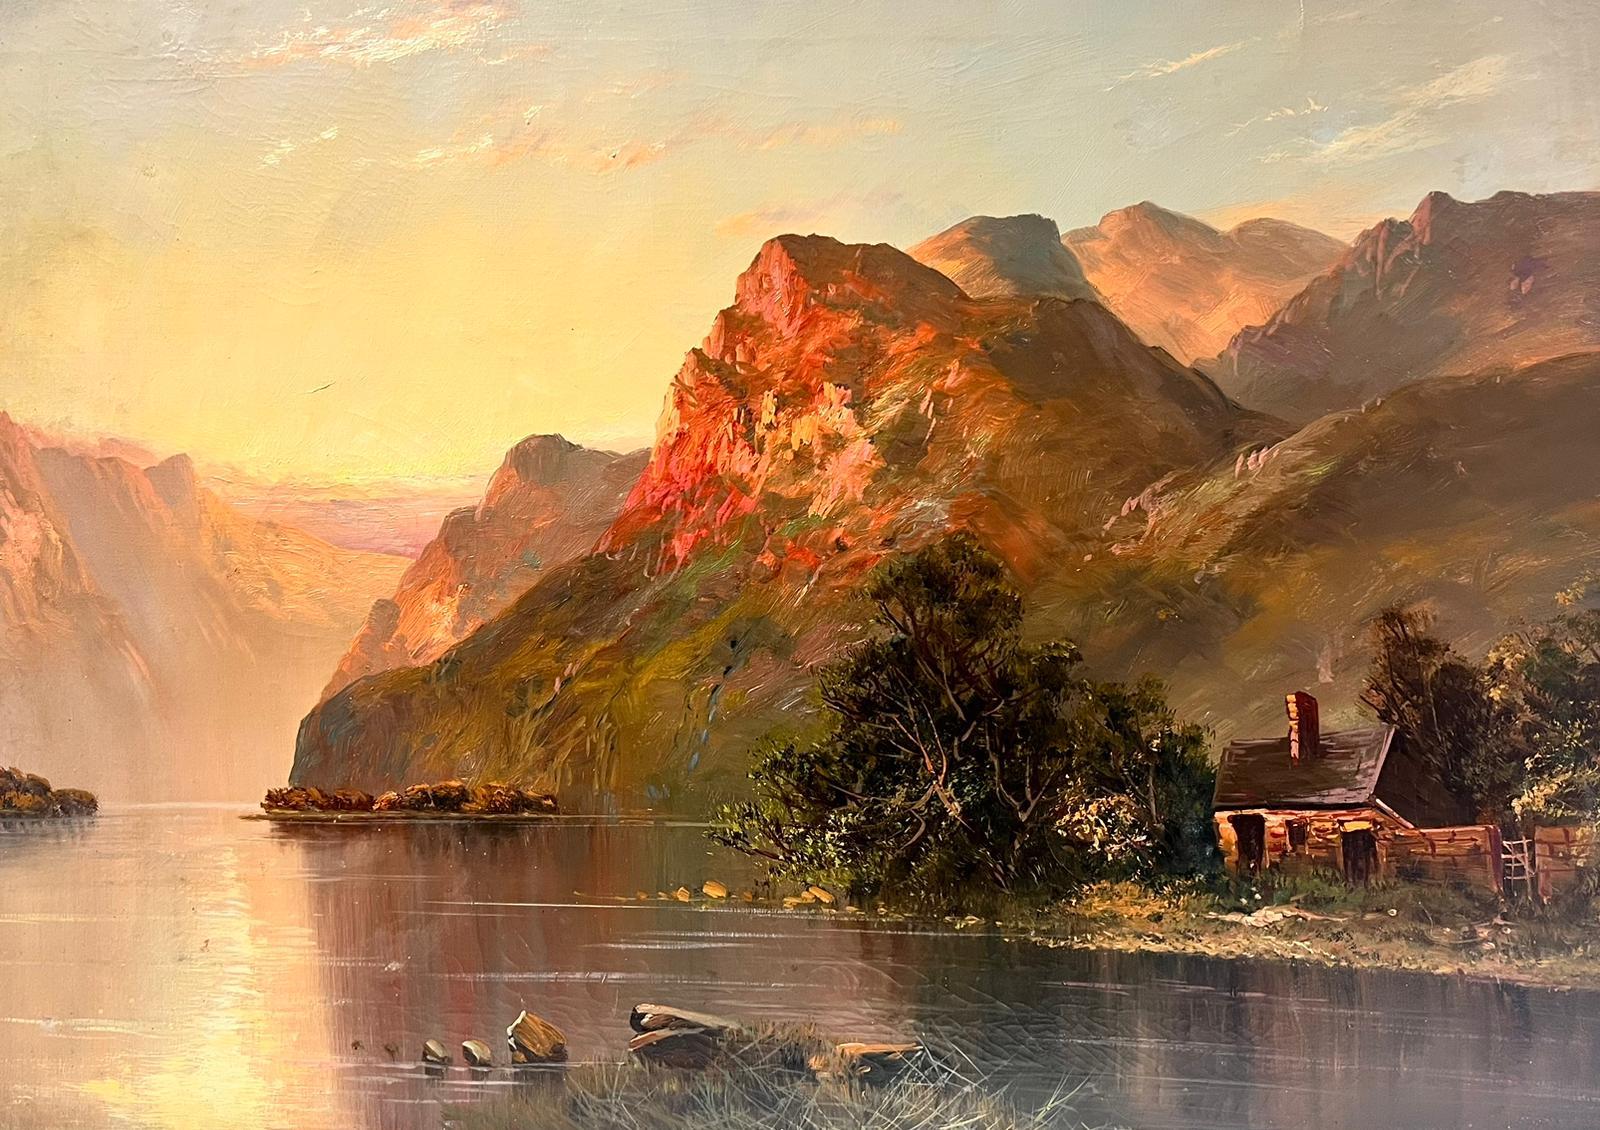 Majestic Scottish Highlands Sunset over Loch Scene & Cottage Antique Oil - Painting by F. E. Jamieson